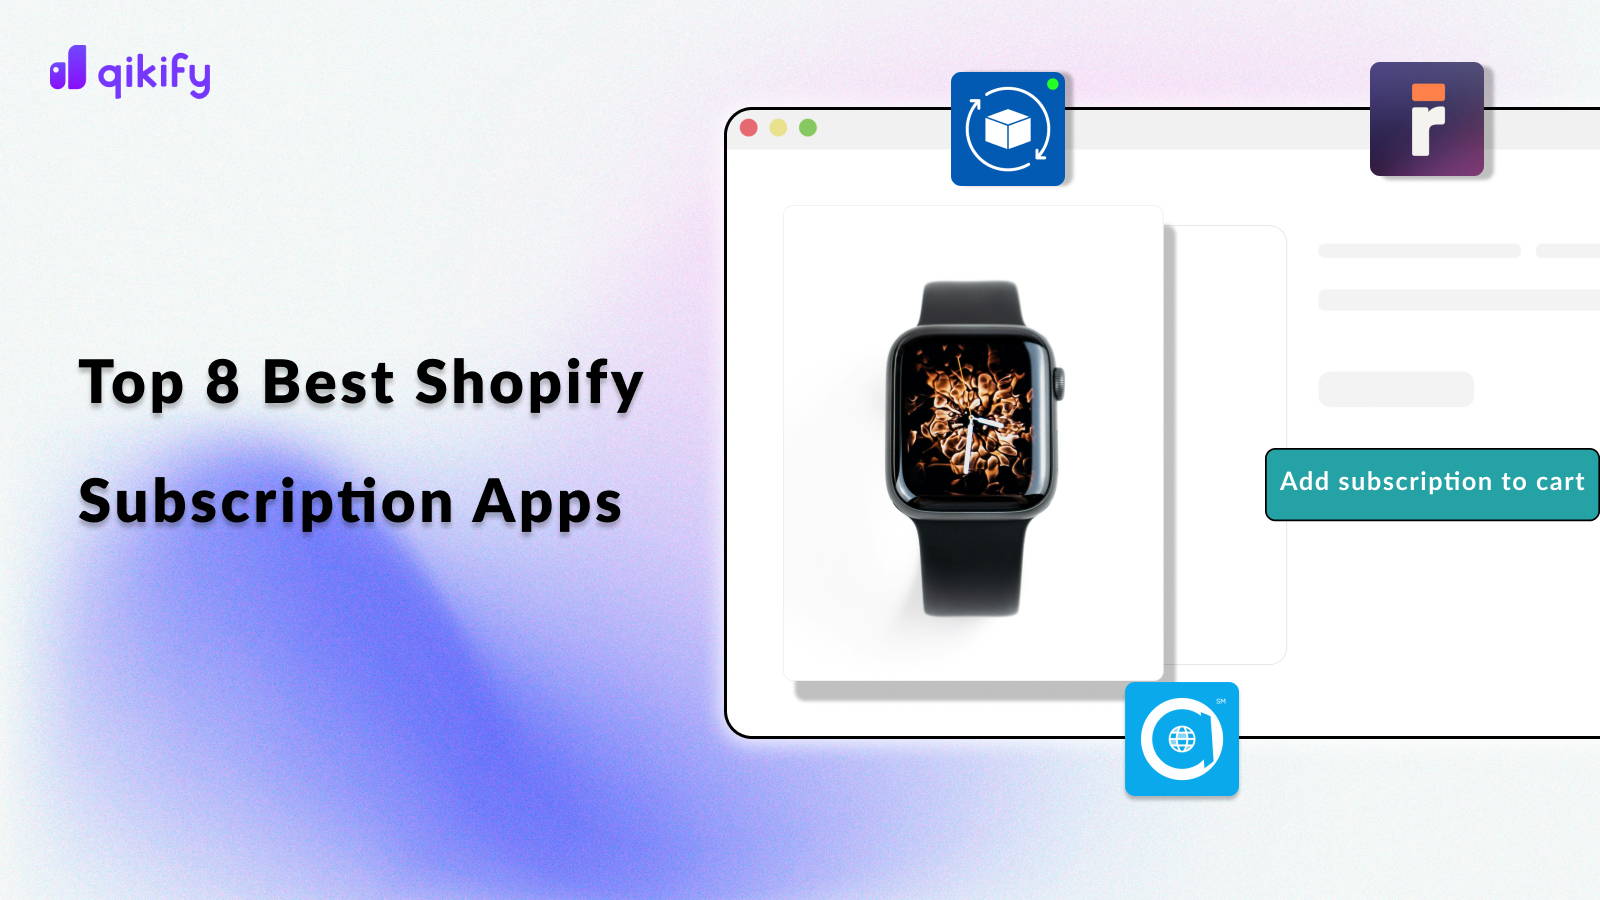 Top 8 Best Shopify Subscription Apps